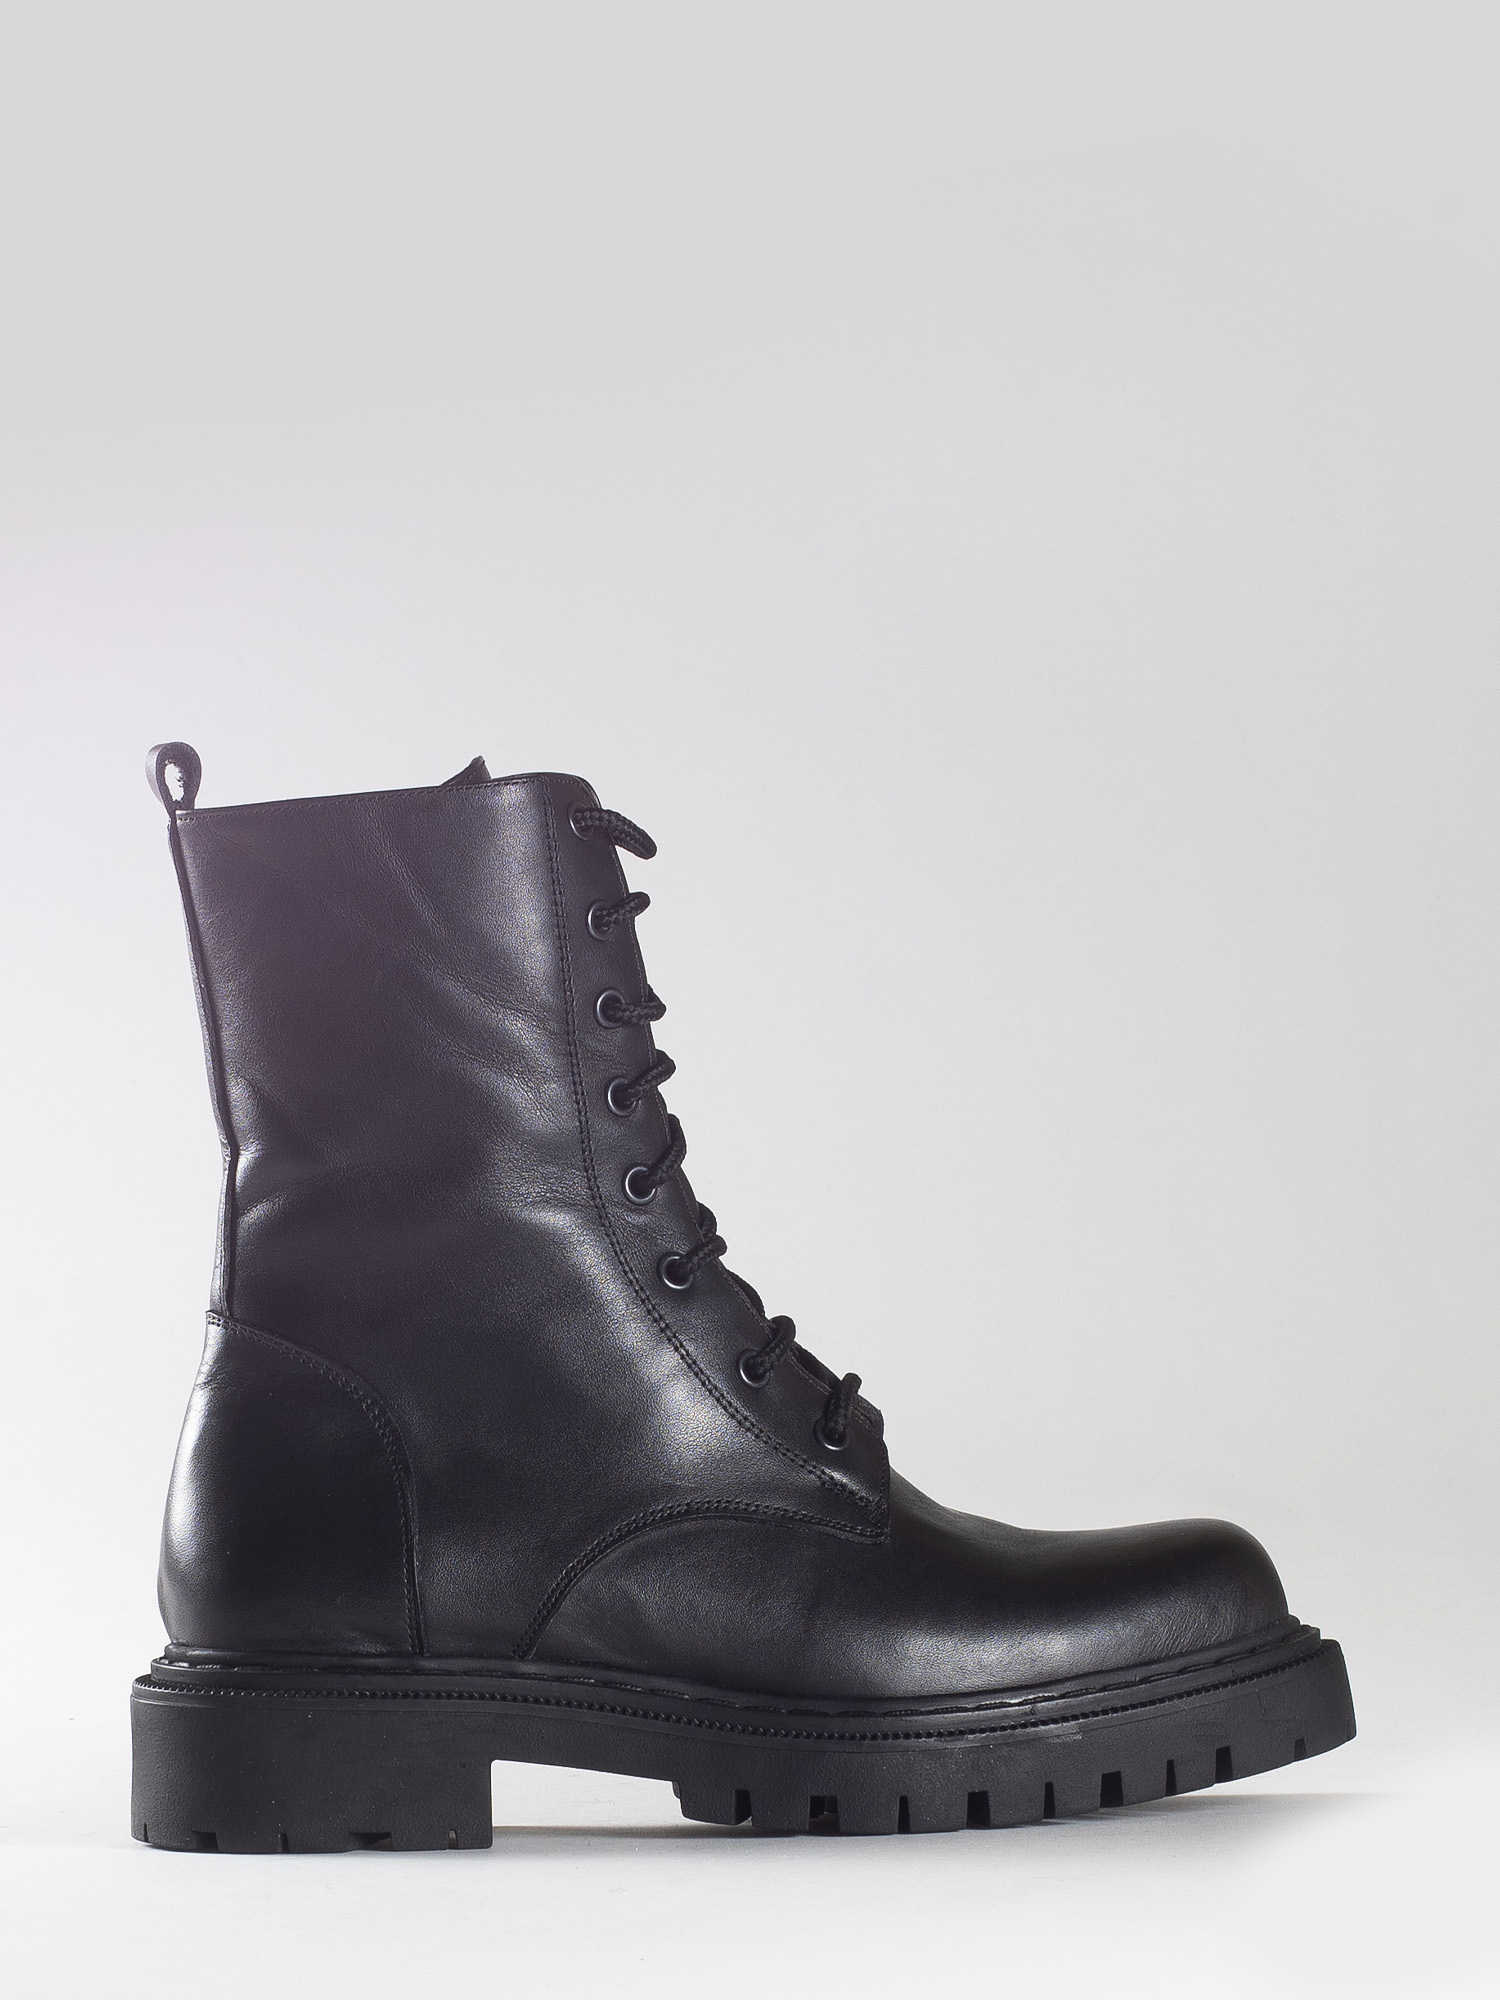 LEATHER BOOTS - ALBANO